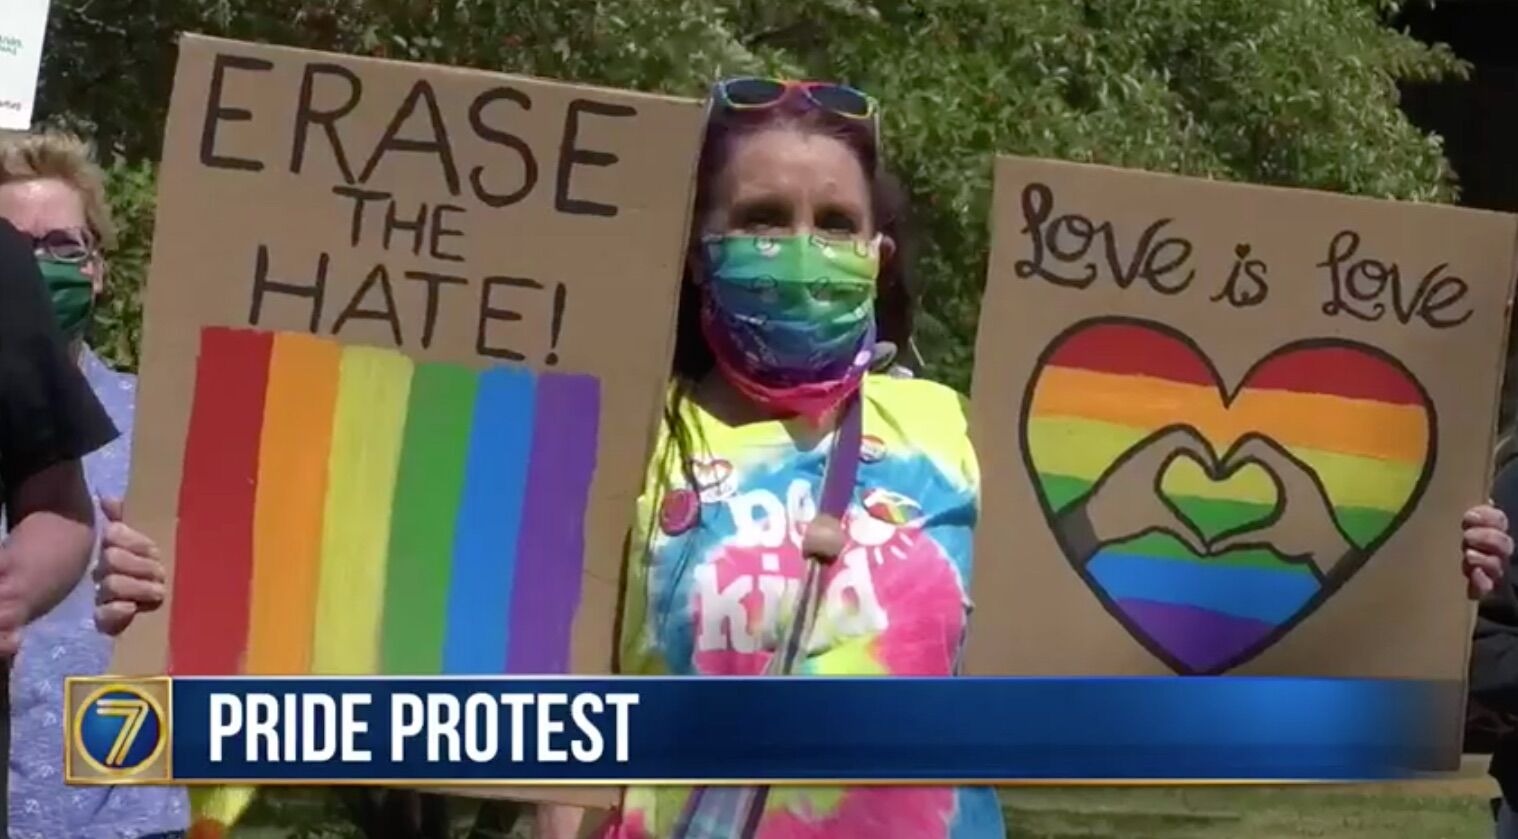 Residents protested in Watertown, New York after a vandal ripped down the town's pride flag.